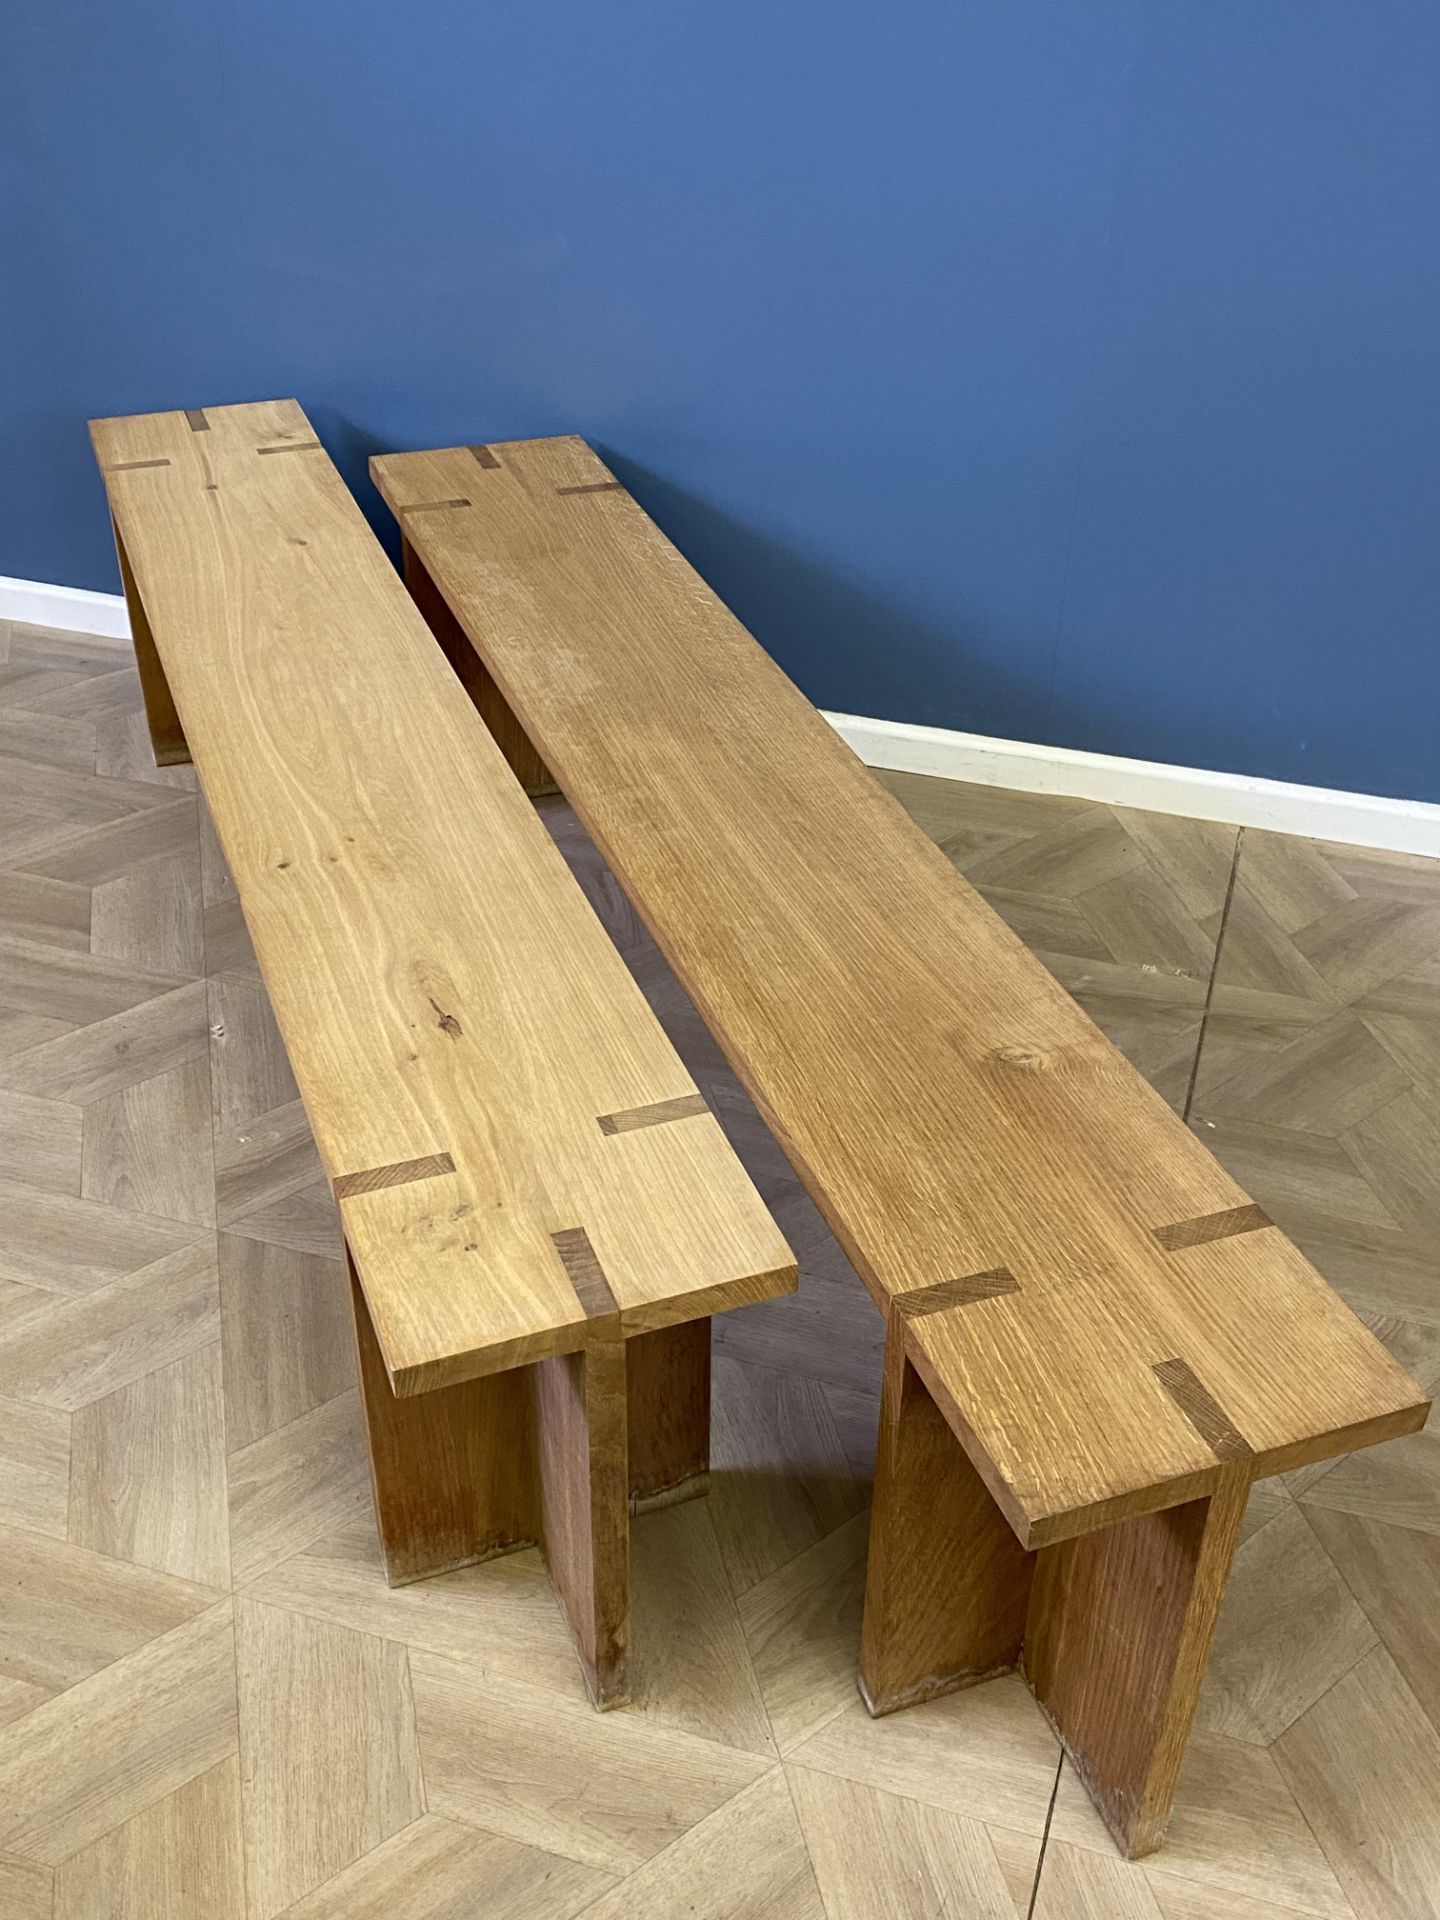 Pair of solid oak pool benches - Image 7 of 7